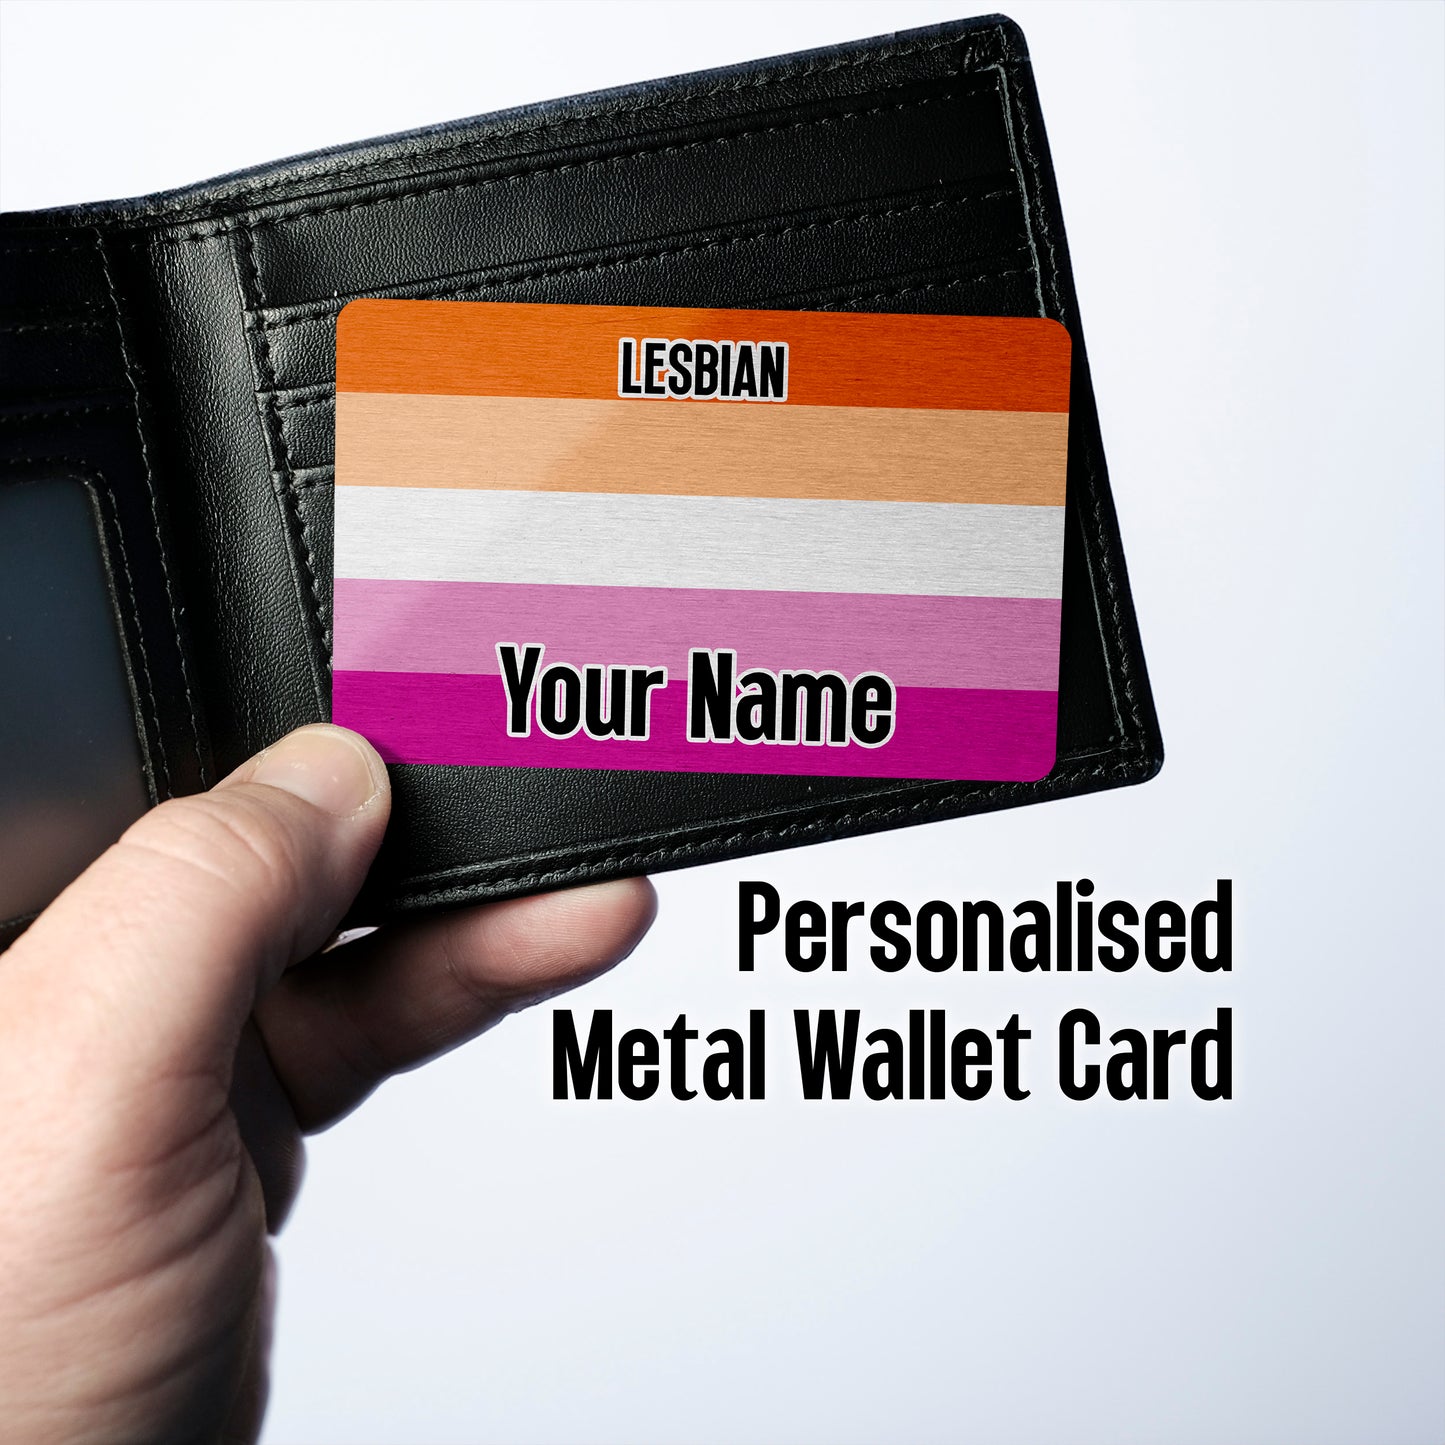 Aluminium metal wallet card personalised with your name and the lesbian pride flag